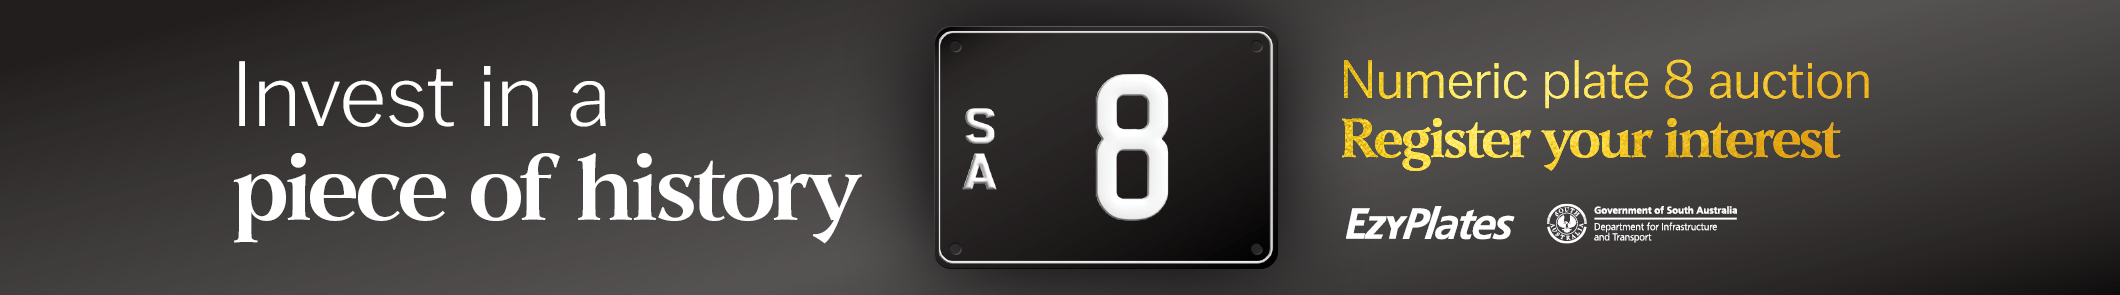 Invest in a piece of history. Numeric plate 8. Register your interest. A render of an SA licence plate with thenumber '8'.